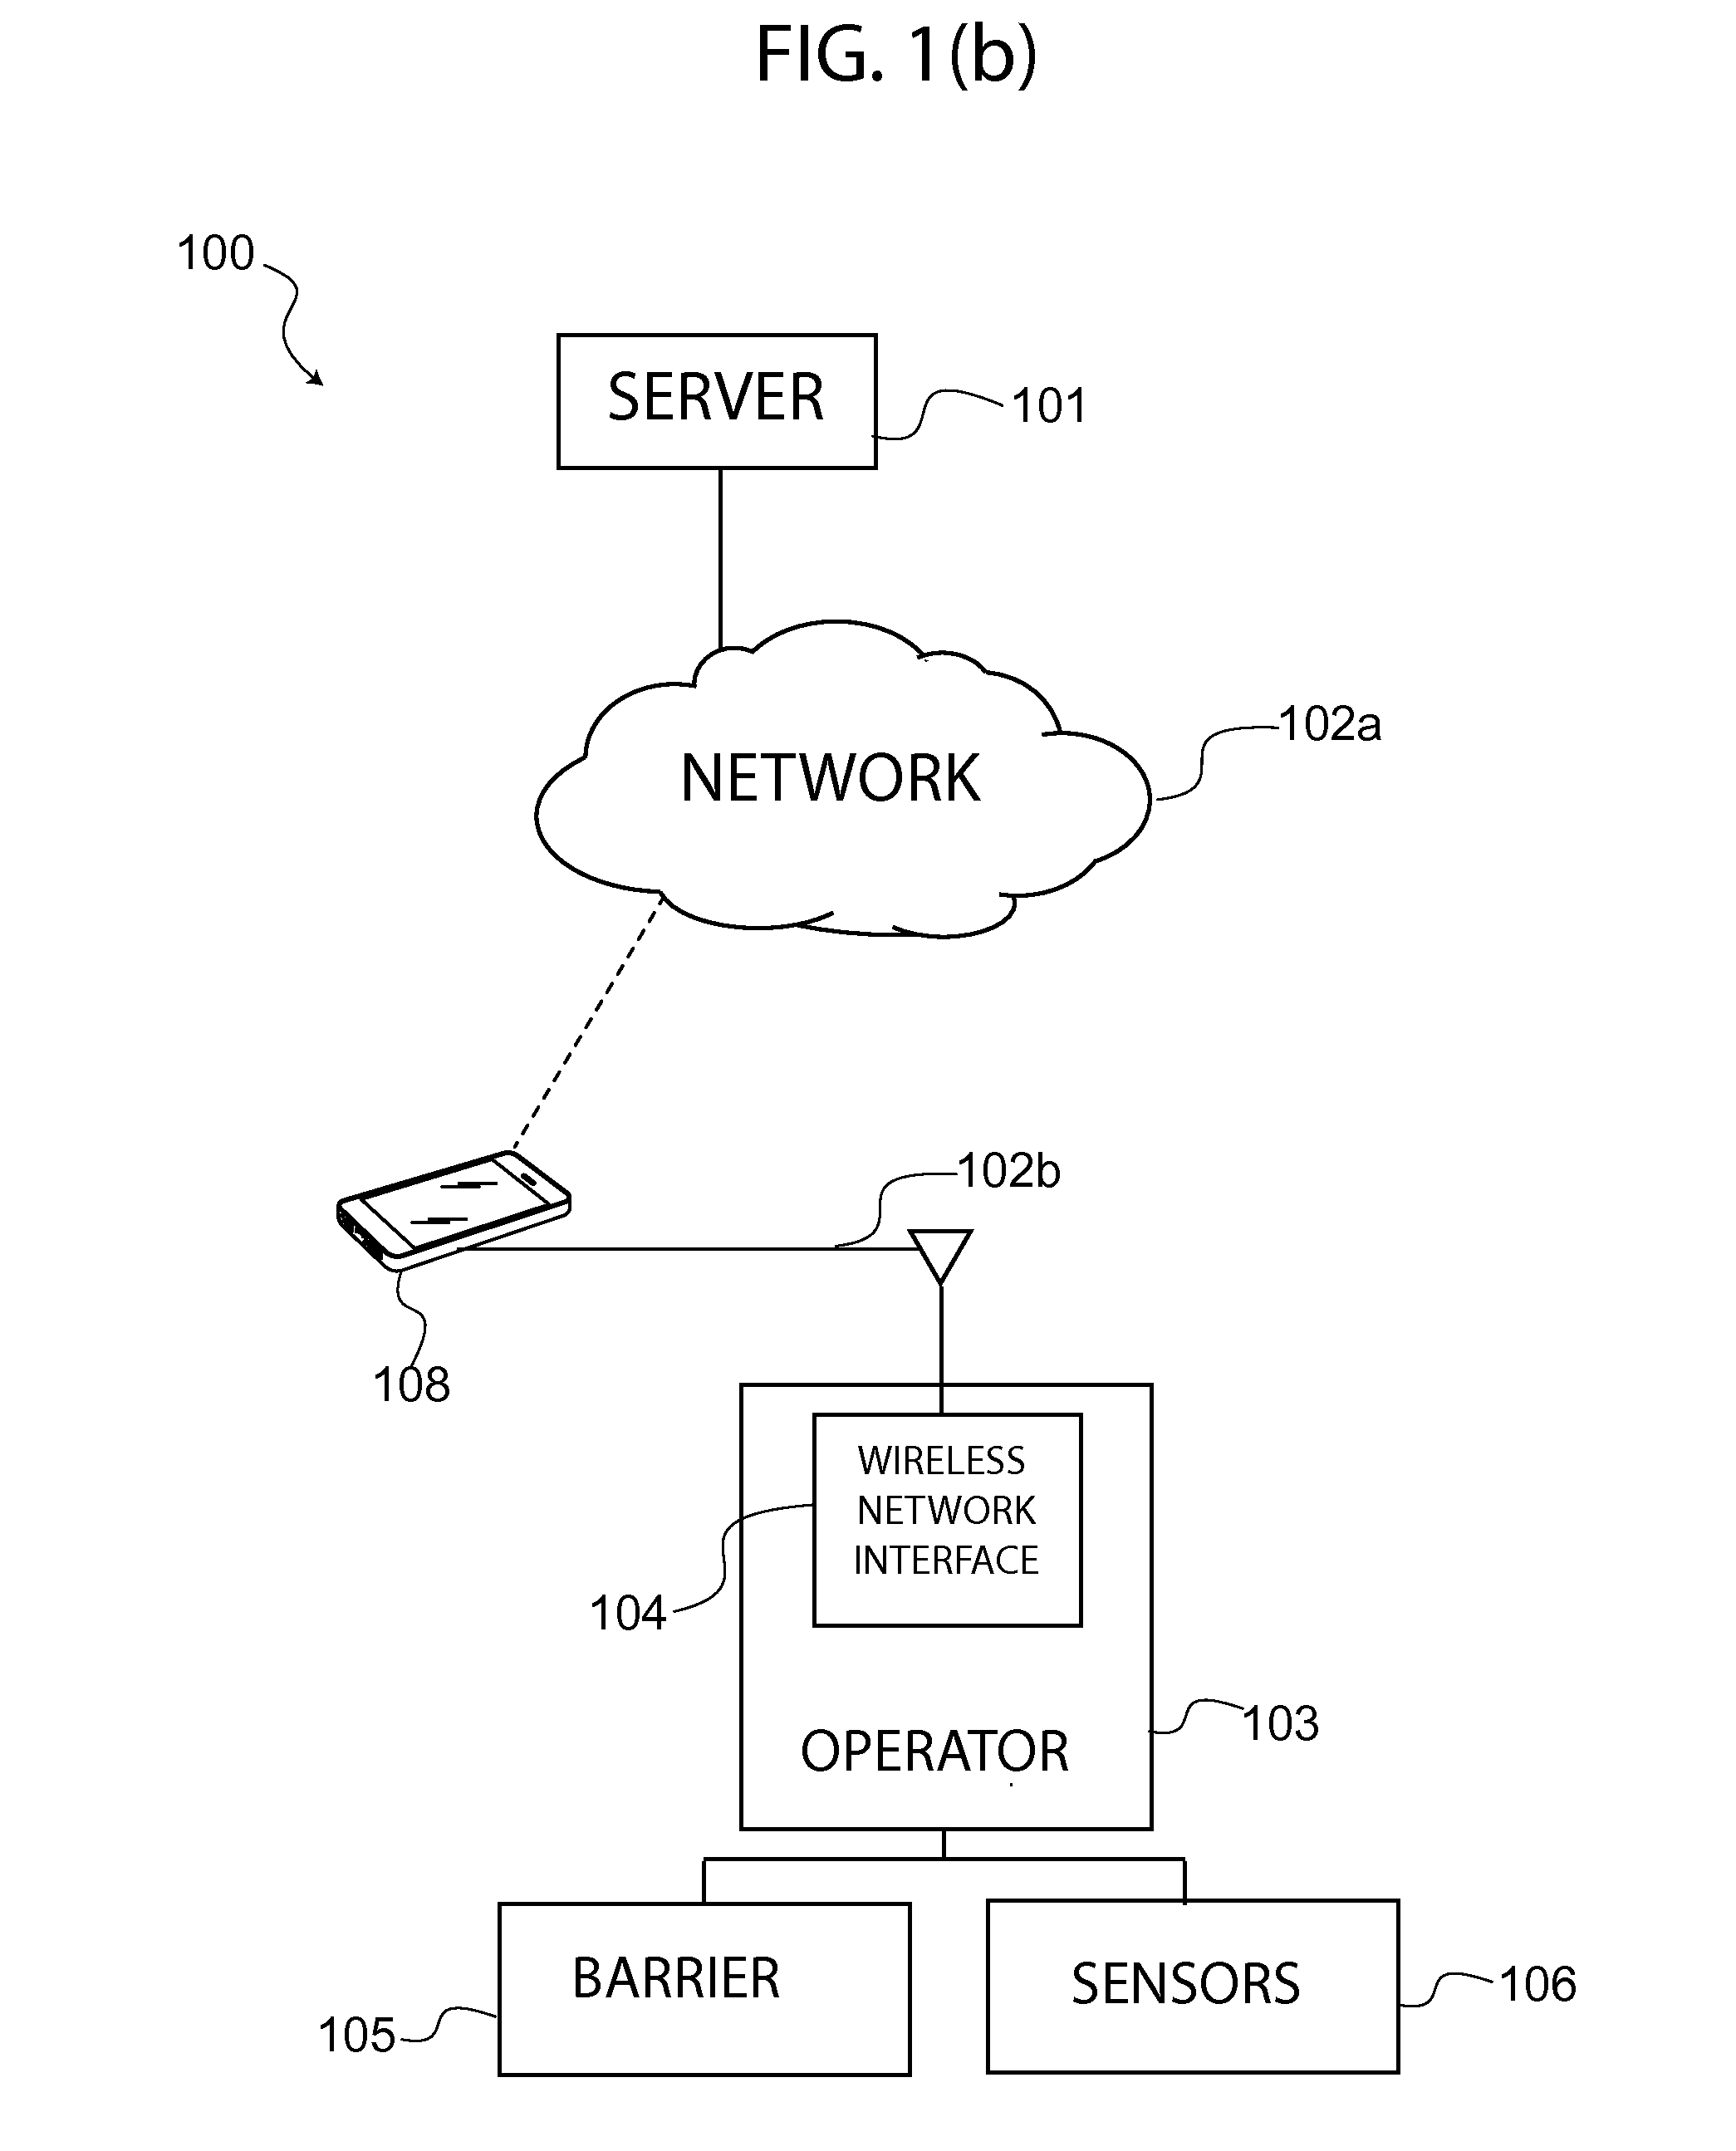 Movable barrier operator with remote monitoring capabilities